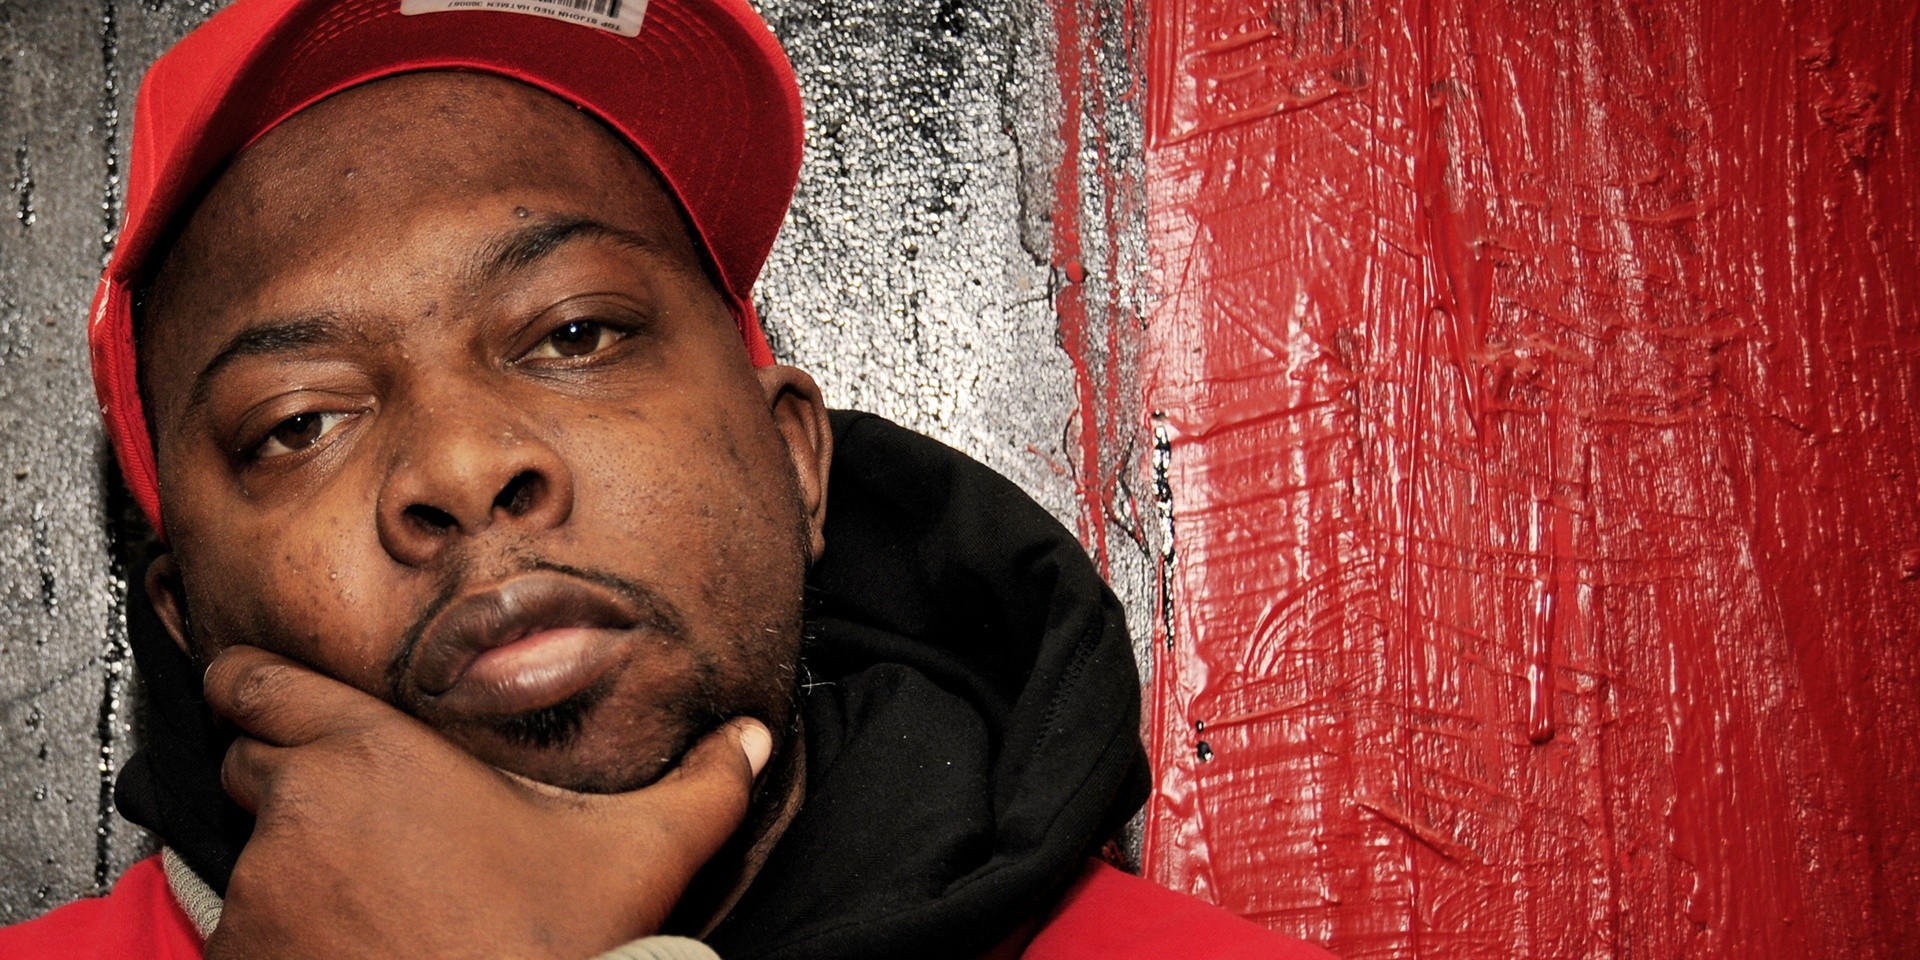 BREAKING: Phife Dawg, founding member of A Tribe Called Quest, has reportedly passed away